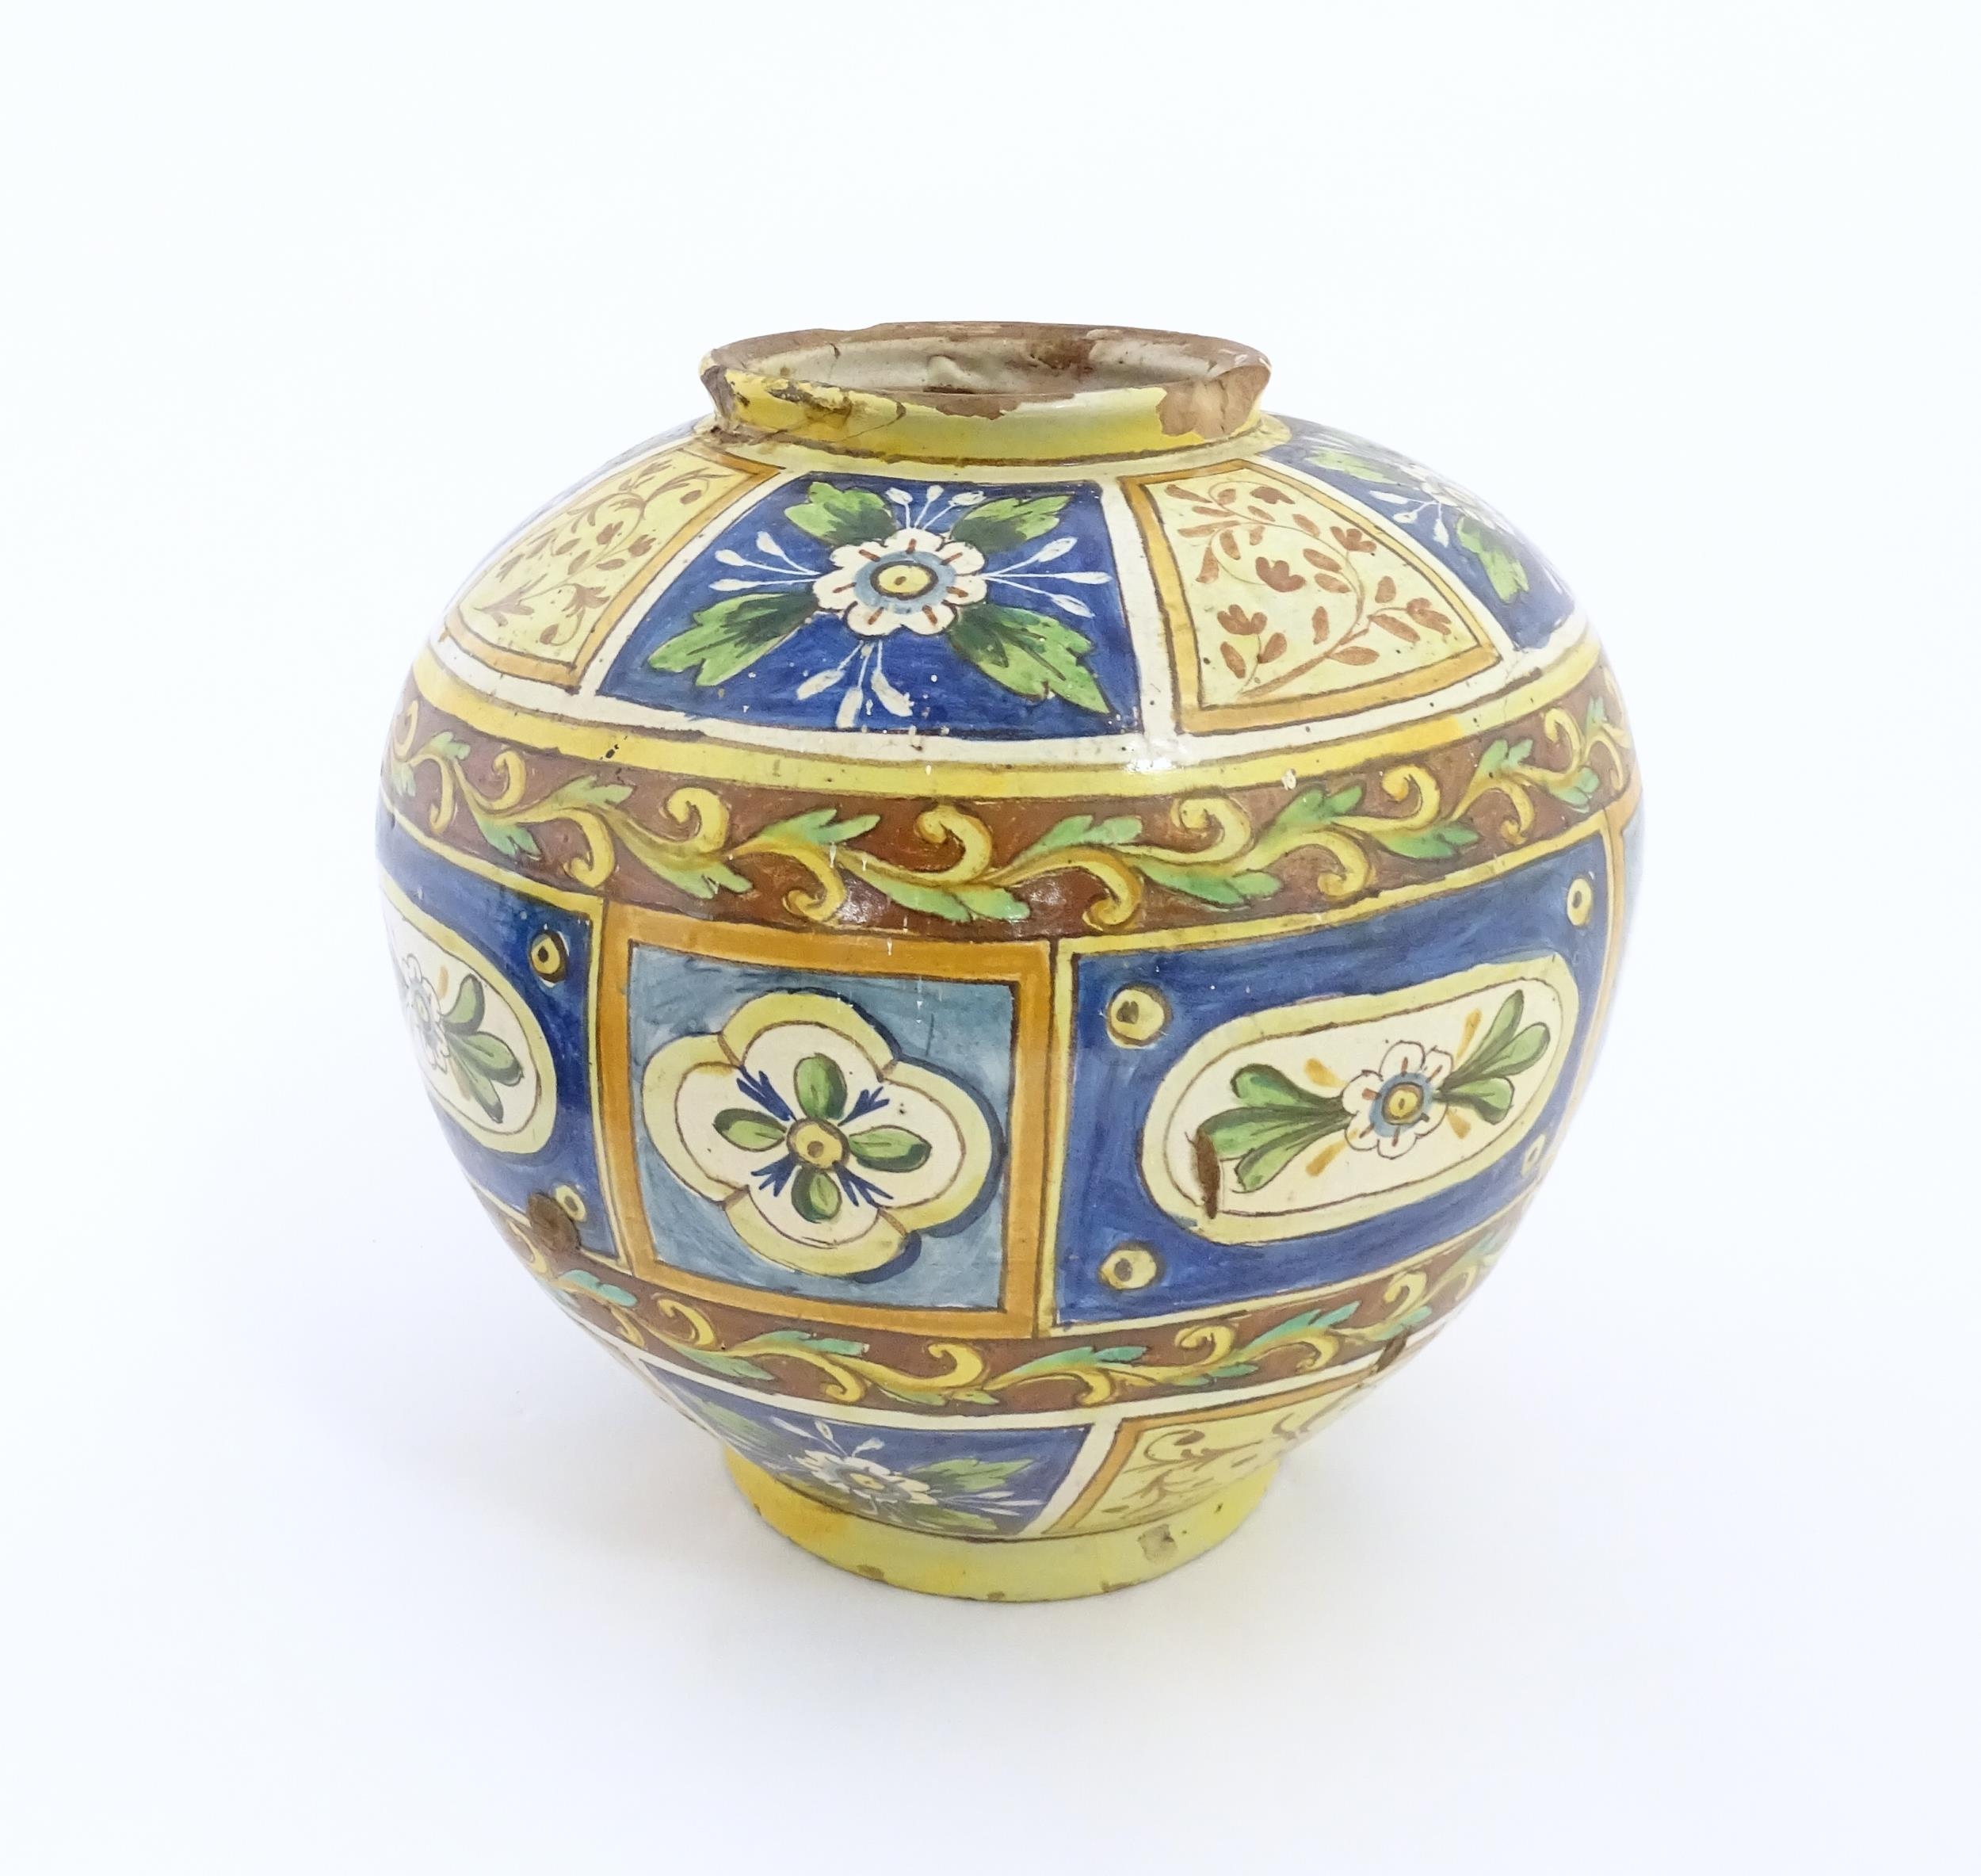 A Sicilian maiolica Bombola vase with panelled and banded decoration depicting flowers and - Image 7 of 10